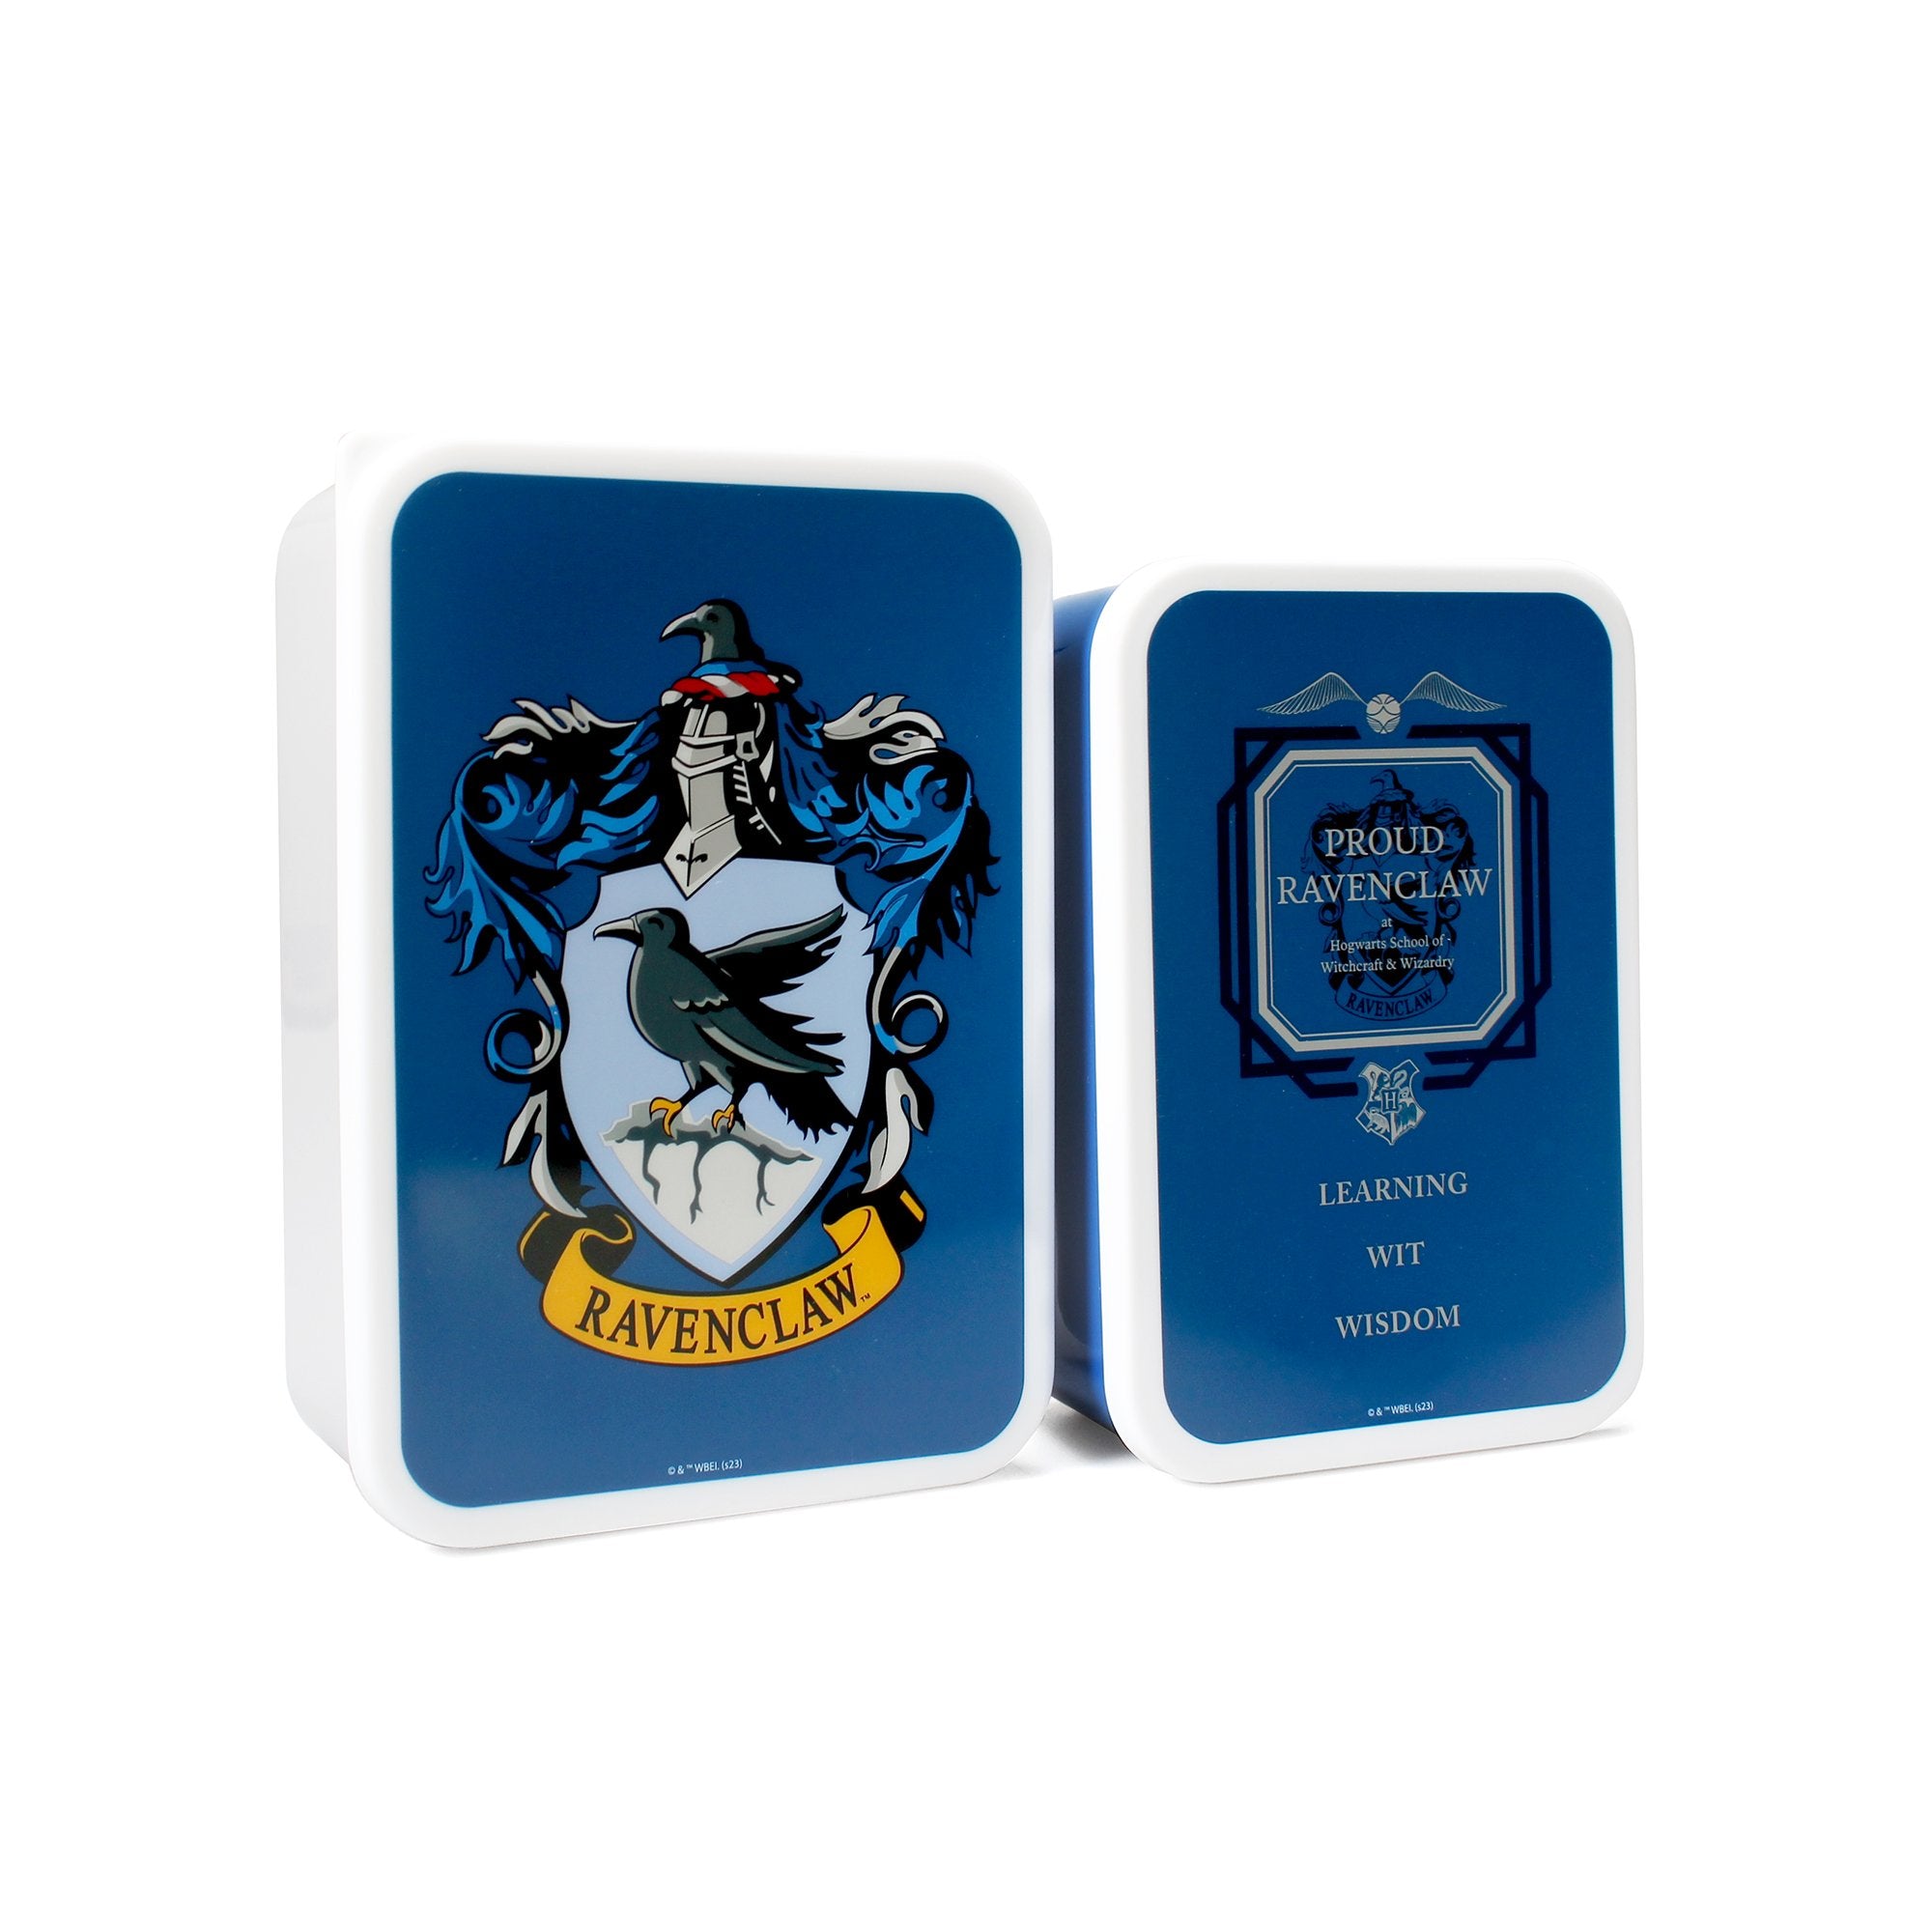 Lunch Box Set of 2 - Harry Potter (Ravenclaw)